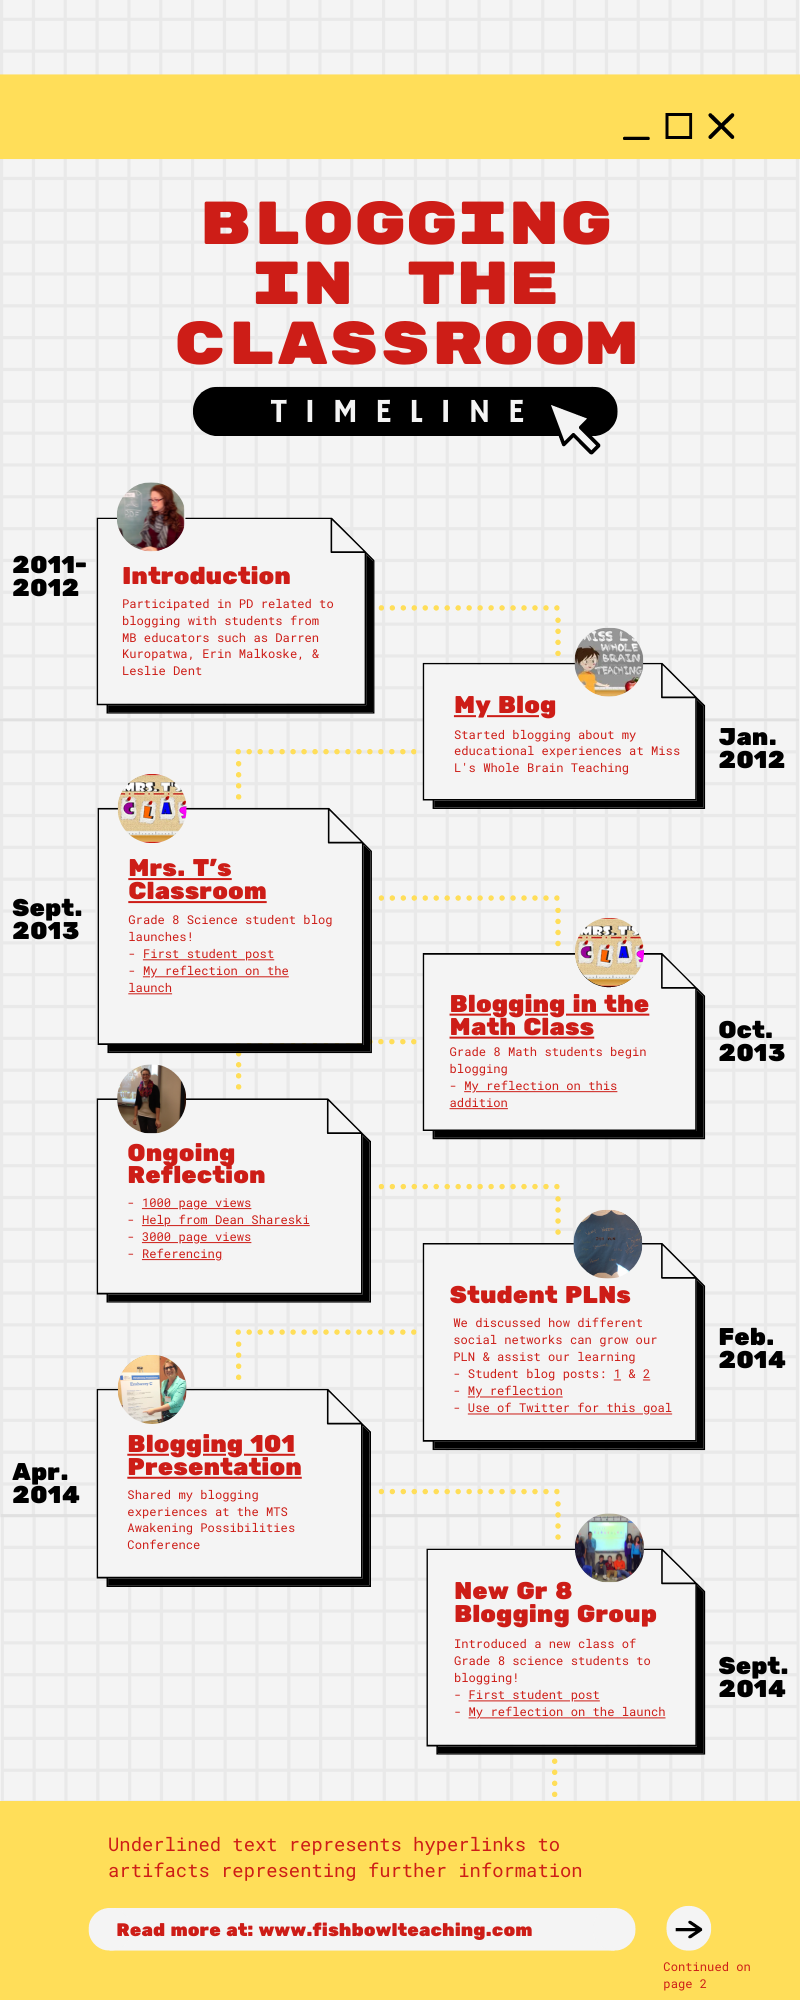 Blogging in the Classroom: A Timeline